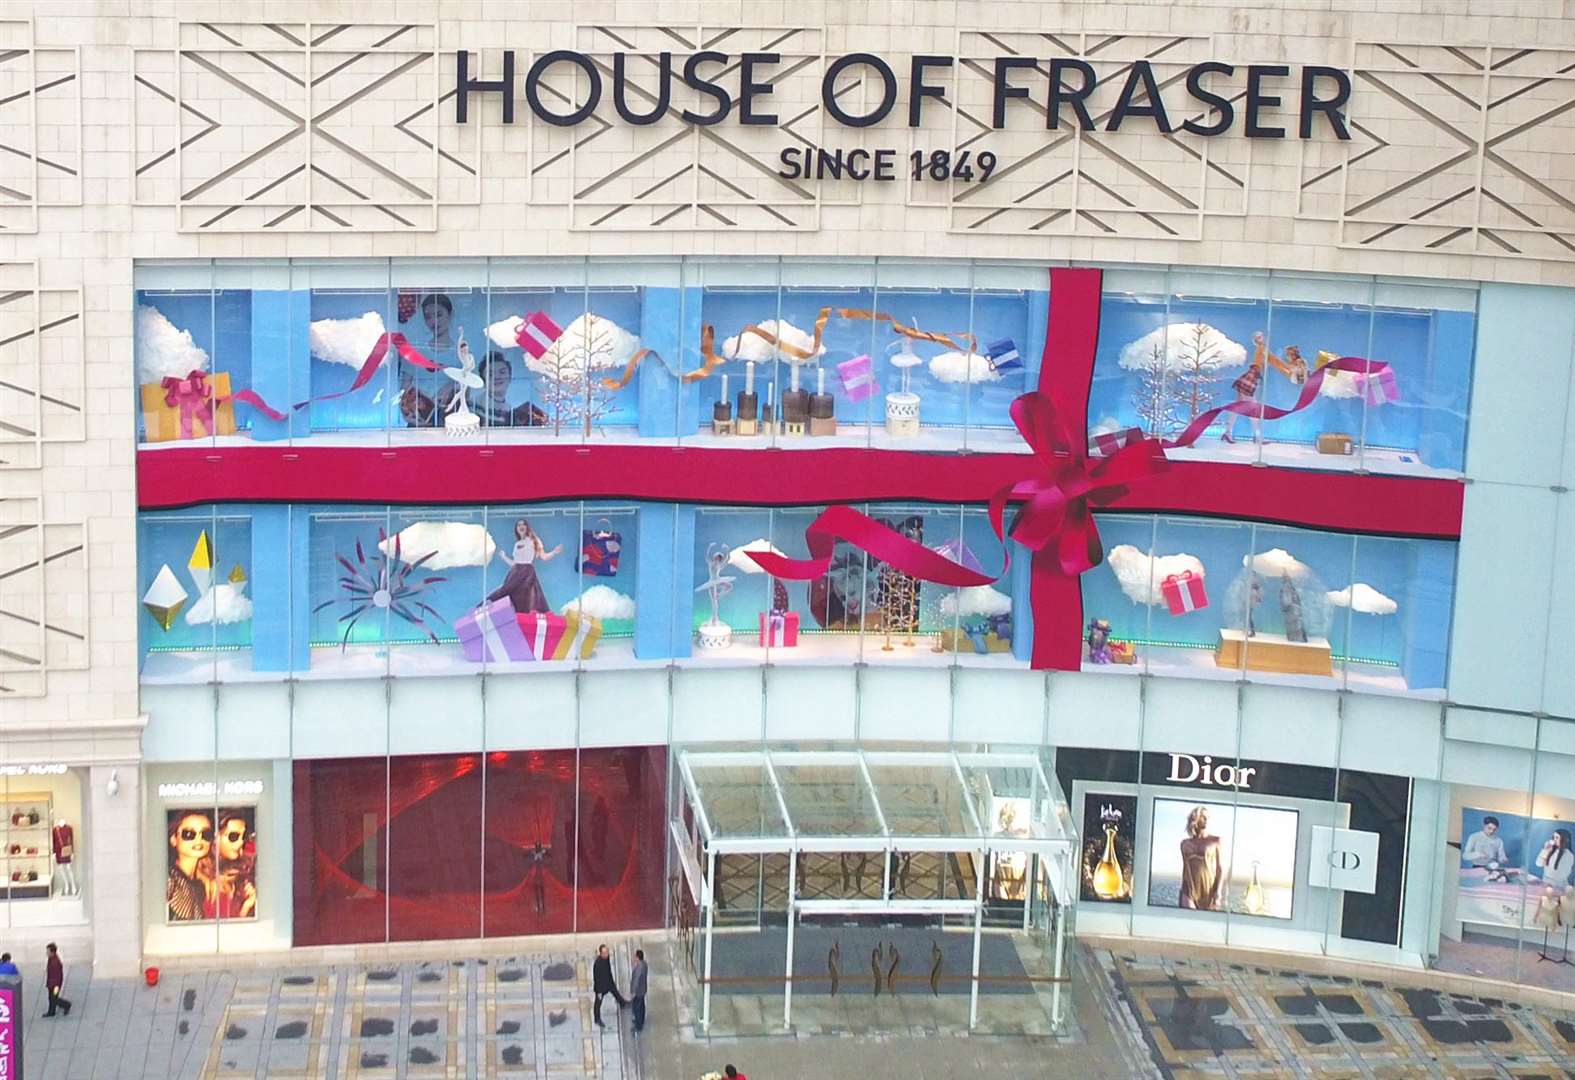 Fresh threat to House of Fraser stores after challenging takeover last year